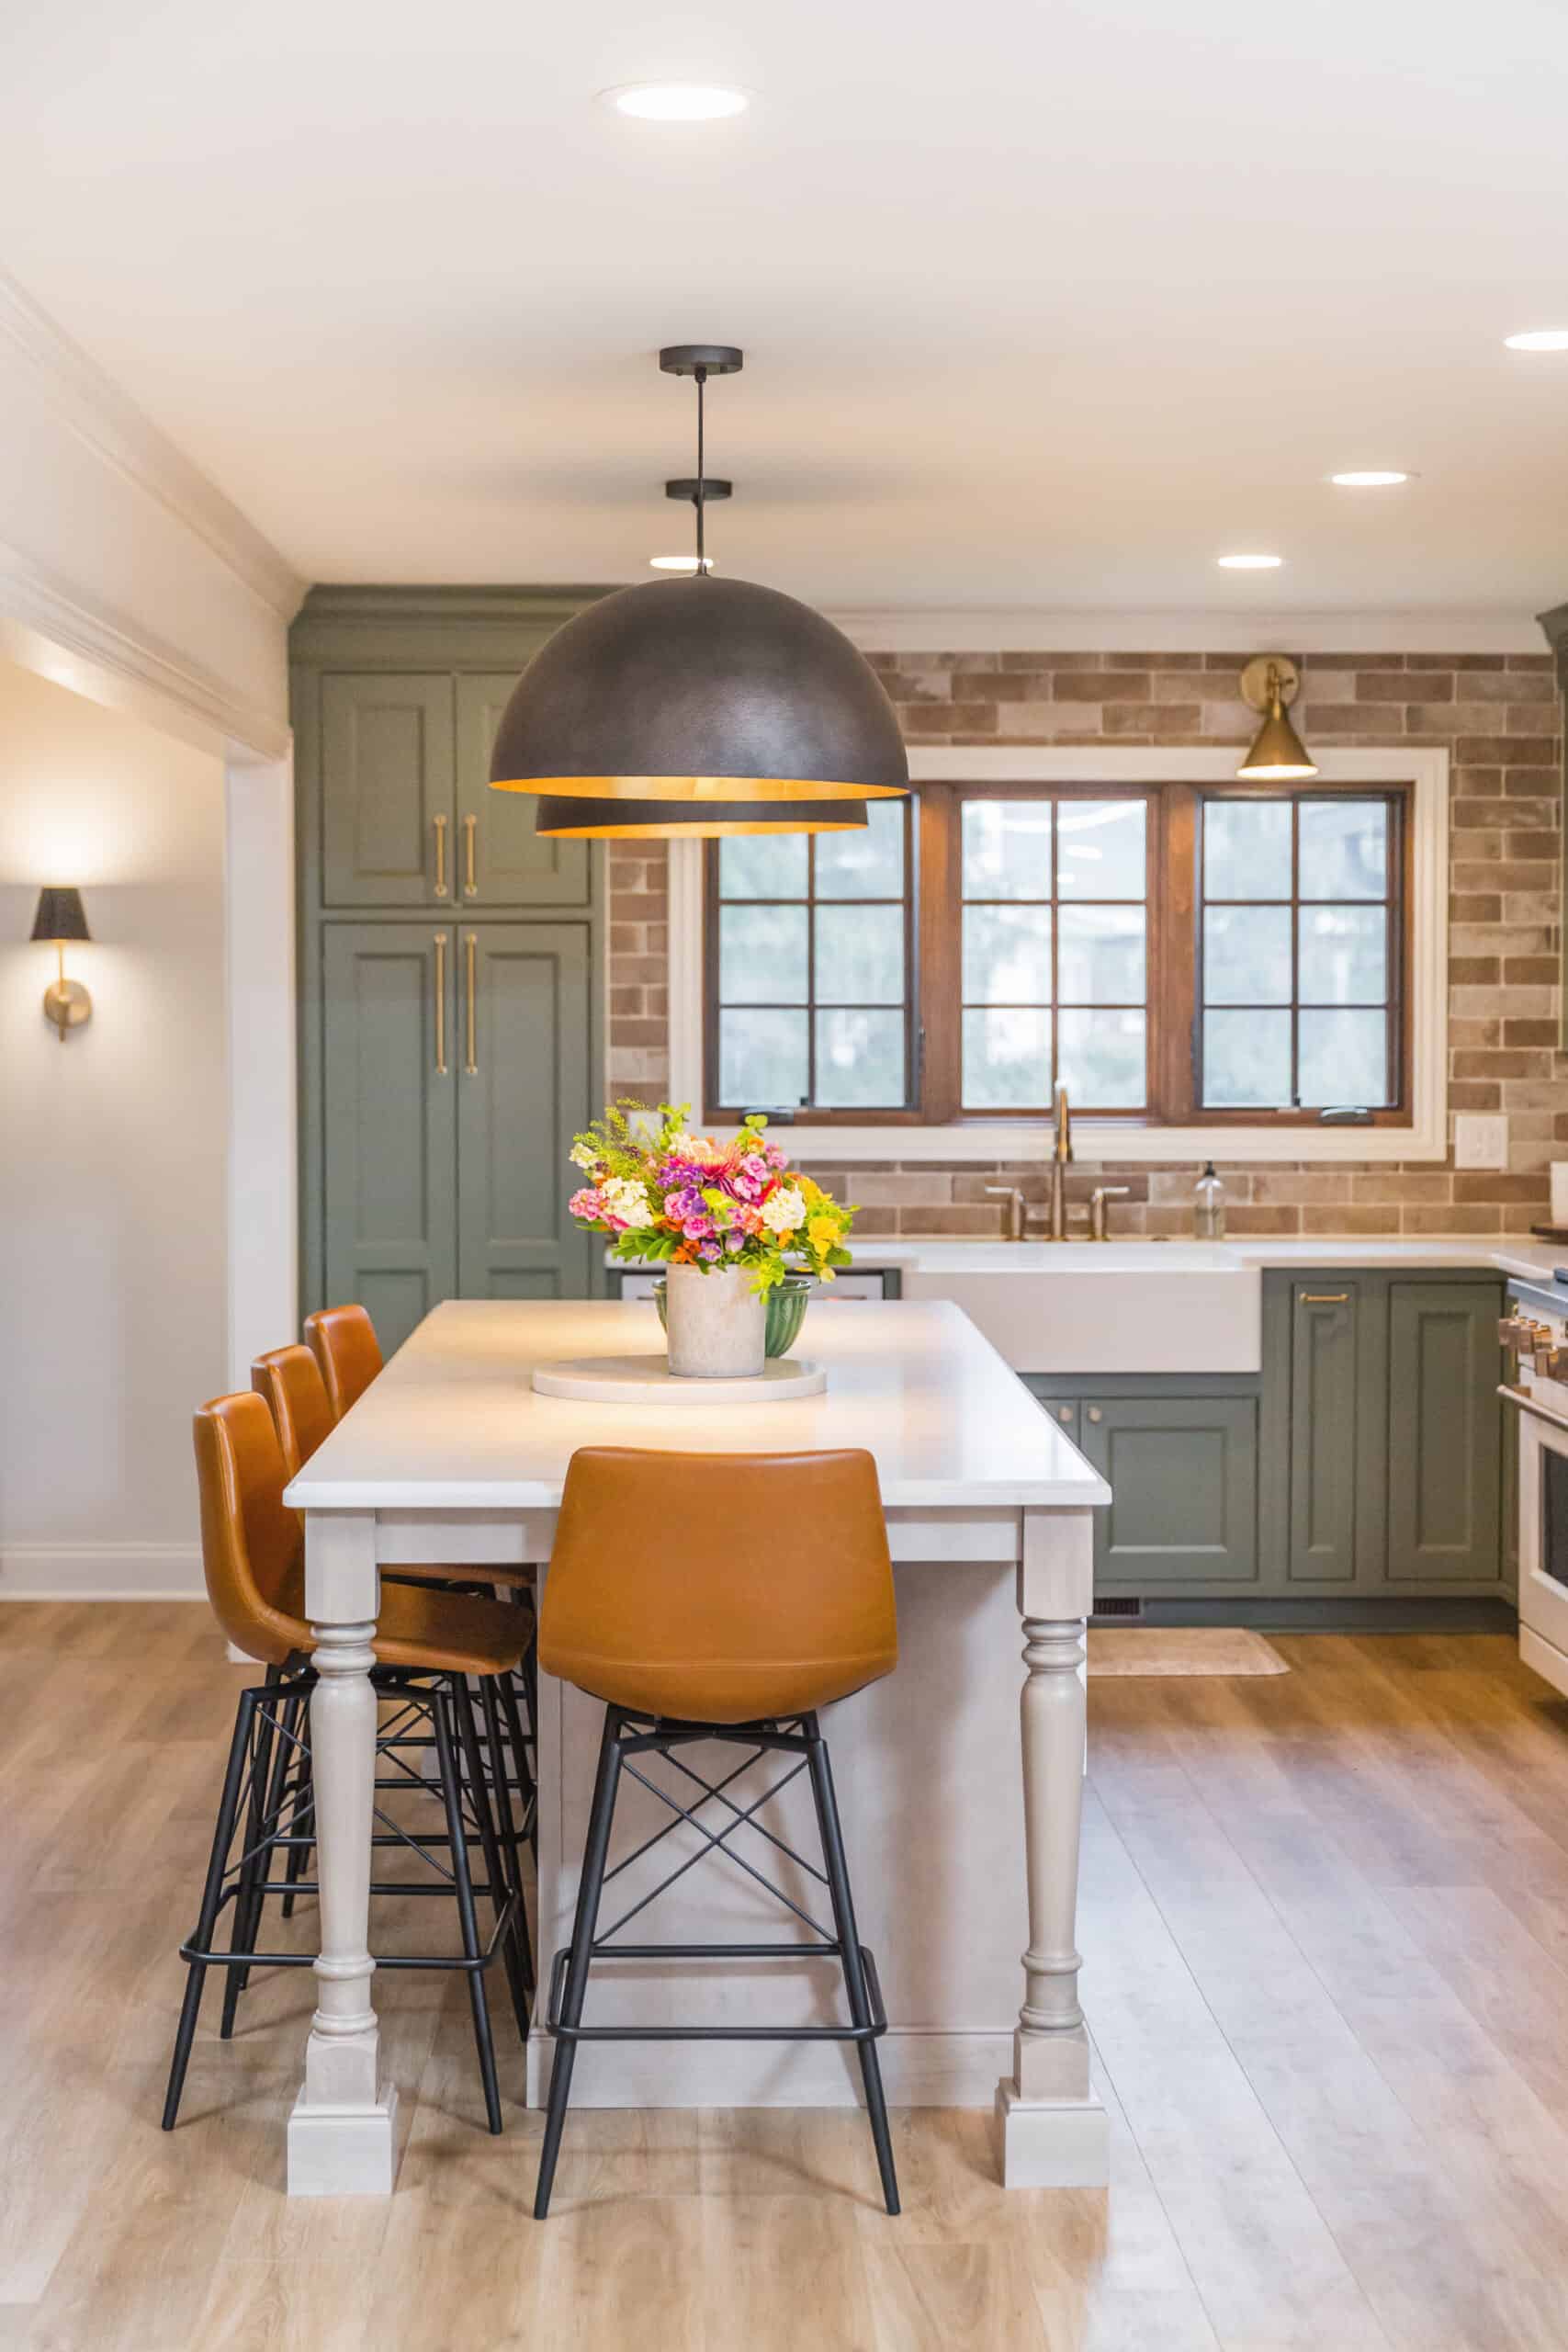 Nicholas Design Build | A bright, contemporary kitchen with a central island, bar stools, and pendant lighting.